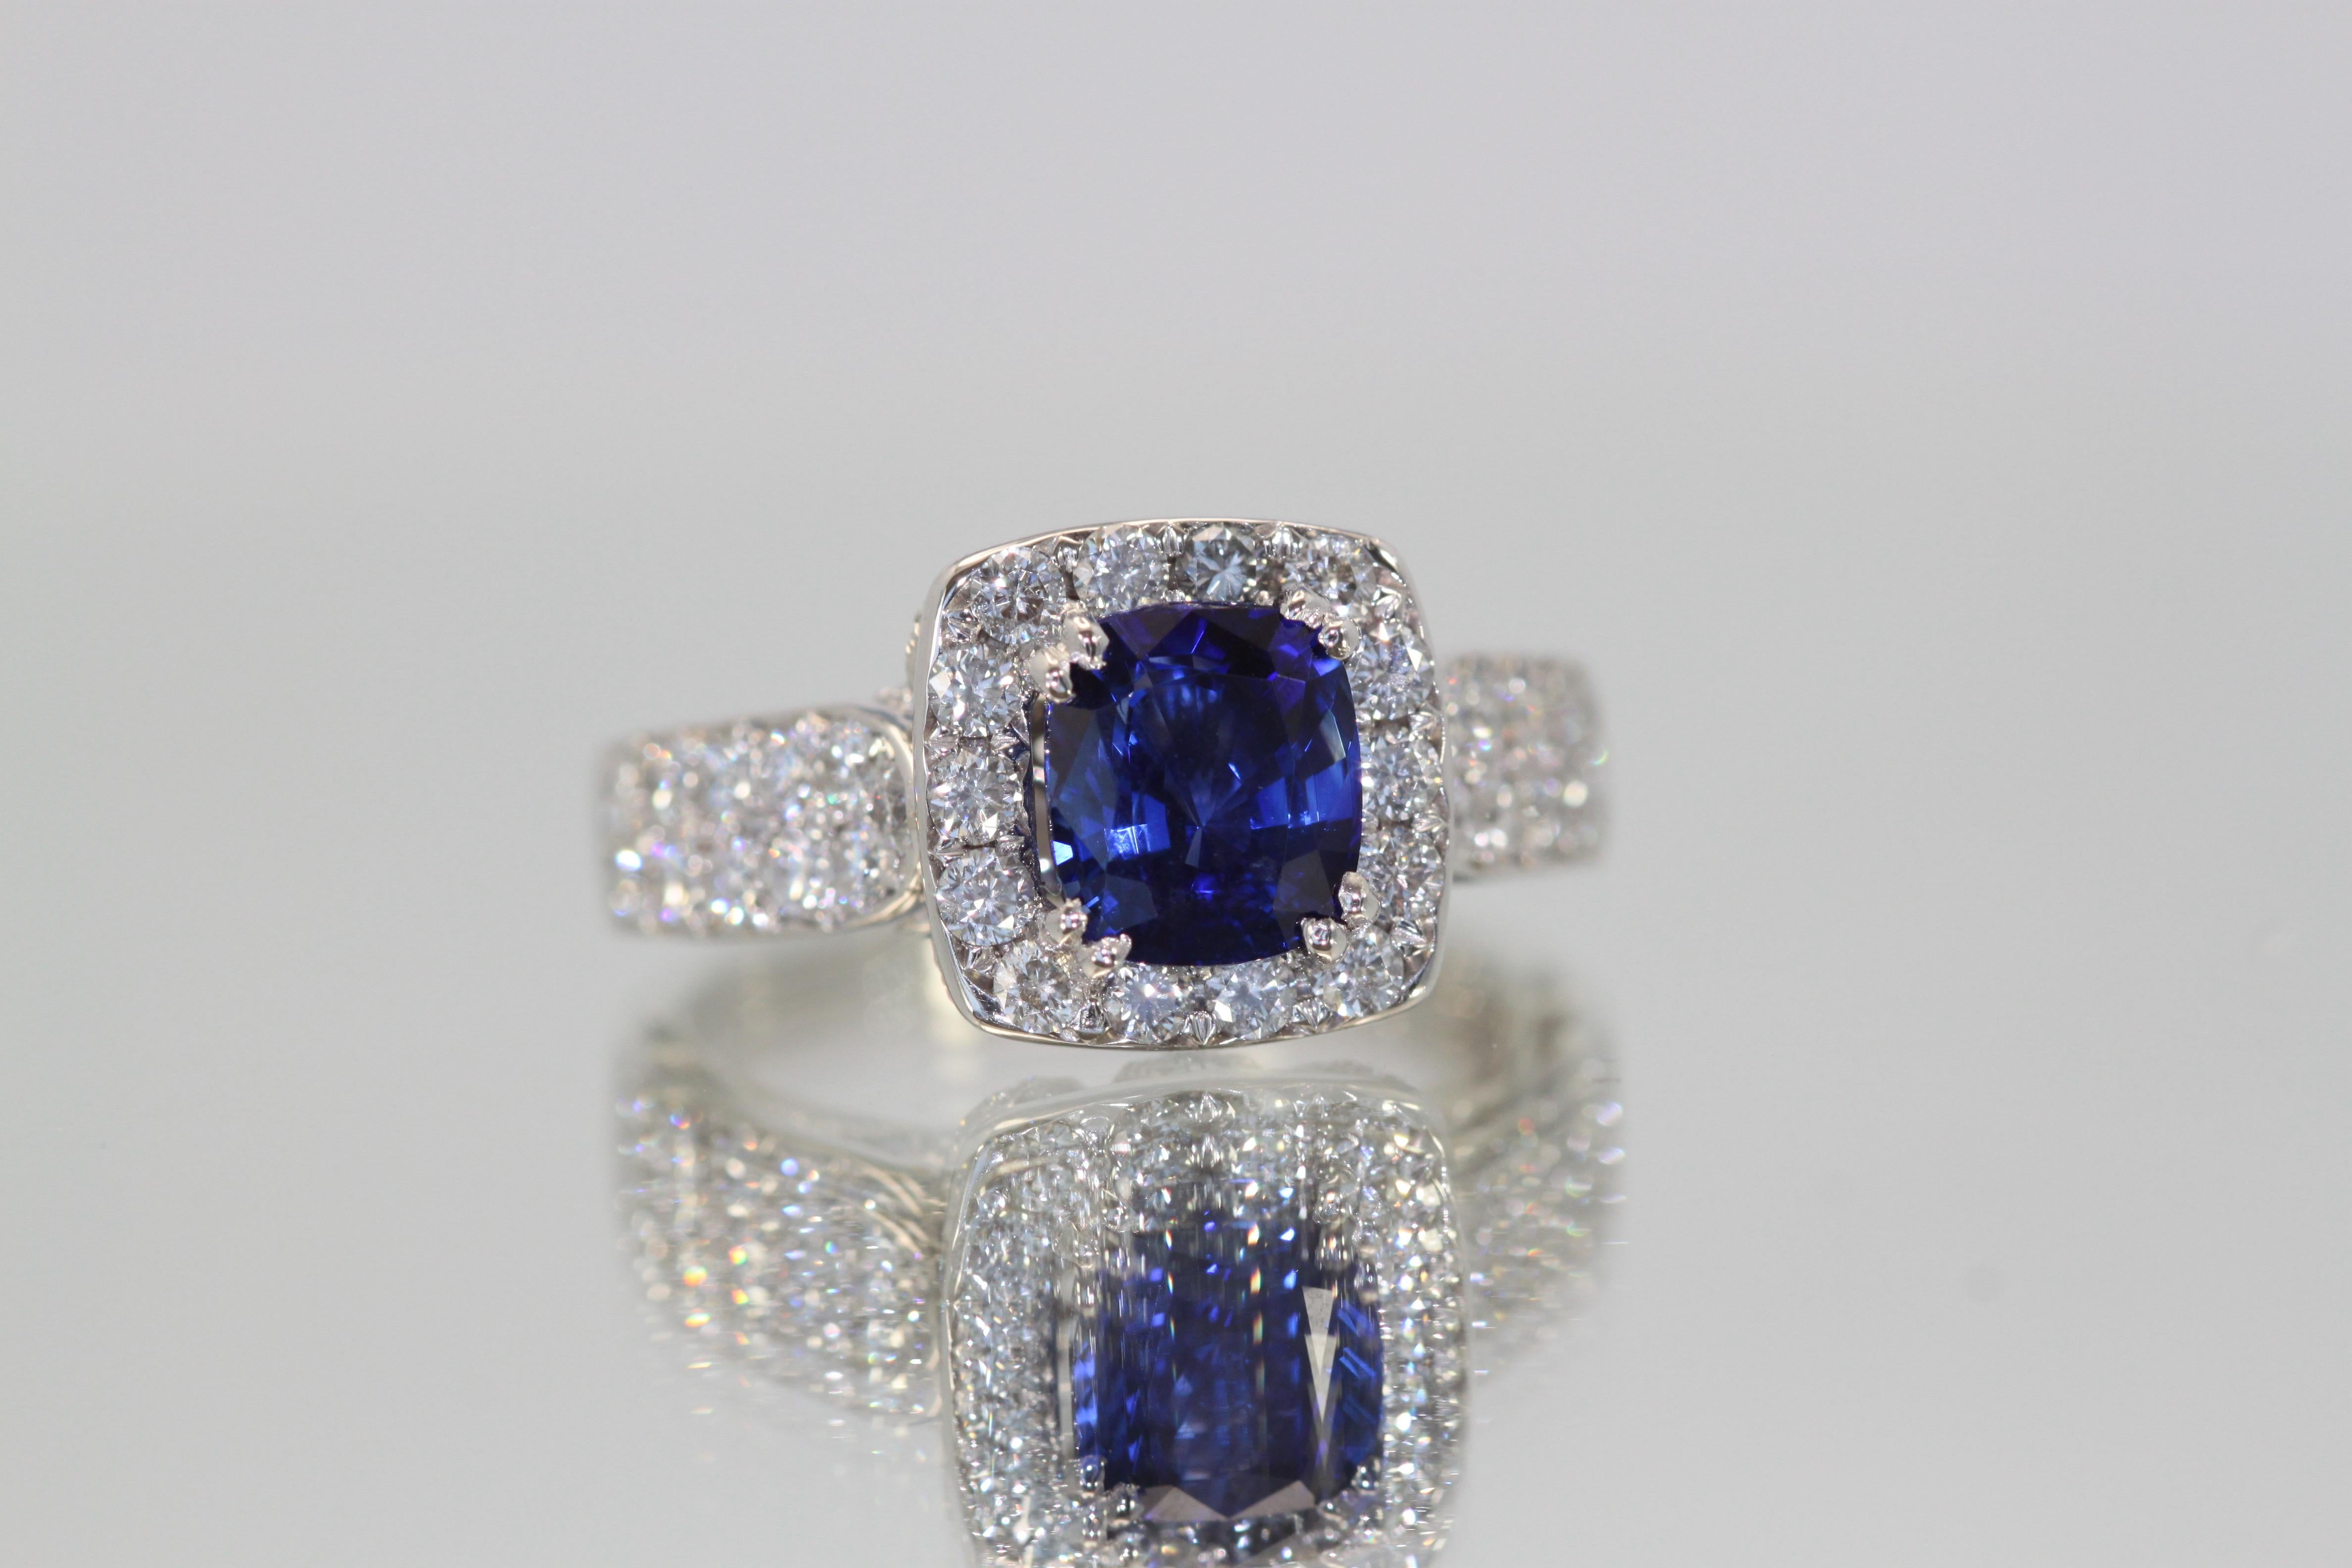 Everybody loves a nice Blue Sapphire ring.  This one is from Burma and the Sapphire is set with a Diamond Surround.  It is a gorgeous deep Blue with magnificent sparkle. The color is absolutely wonderful, true Sapphire Blue. The Sapphire has some